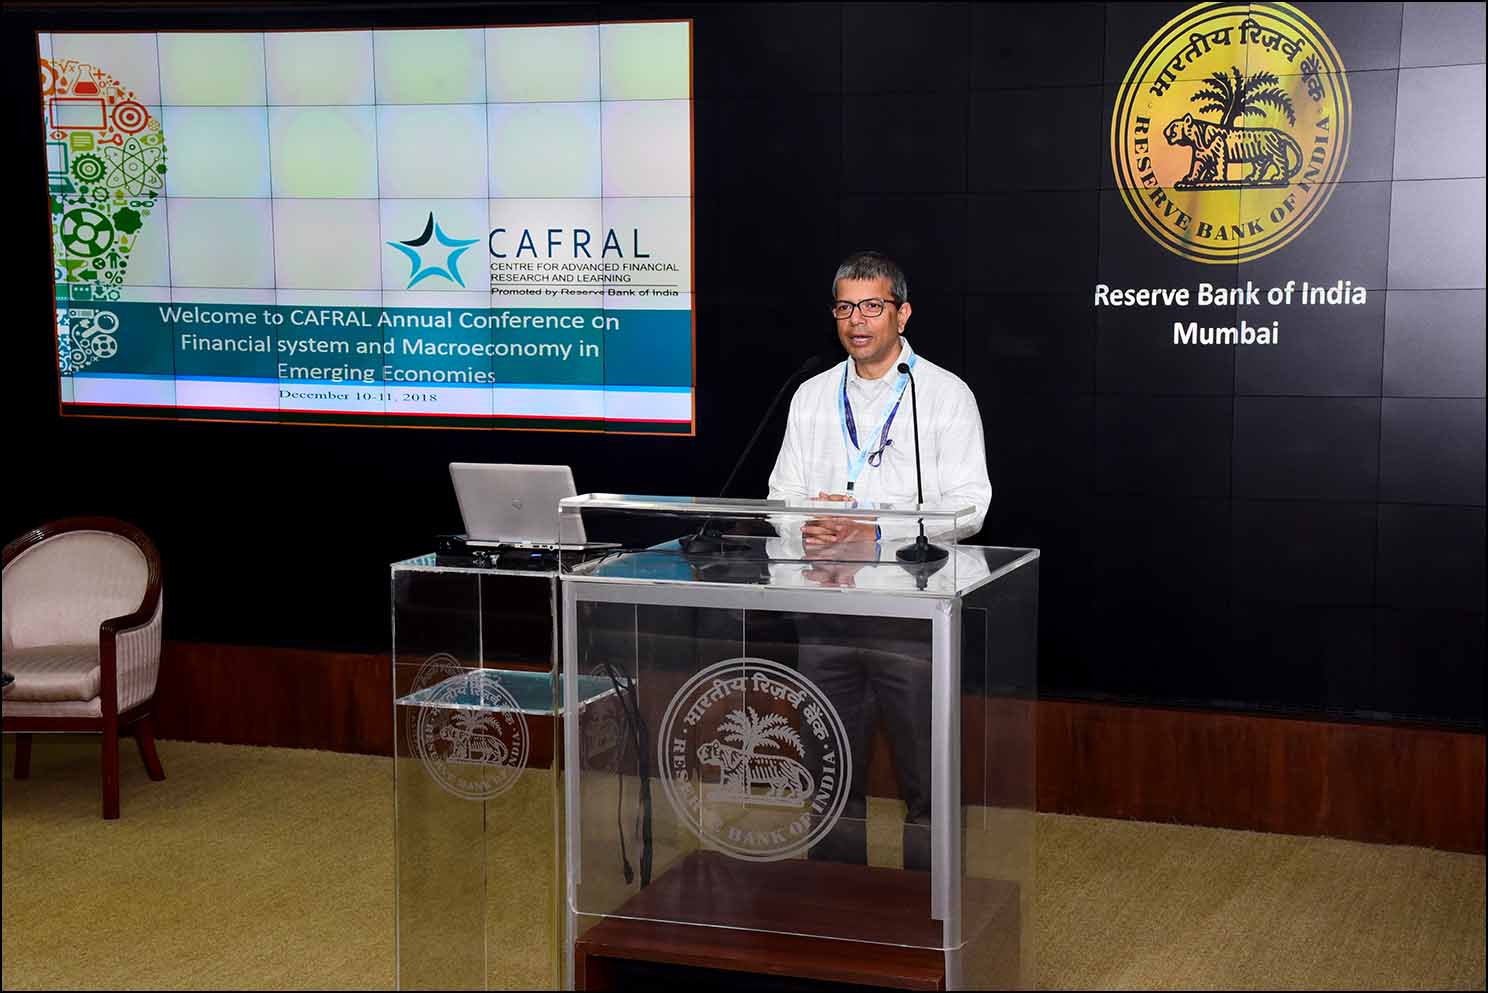 Photos from the CAFRAL conference on Financial system and Macroeconomy in Emerging Economies